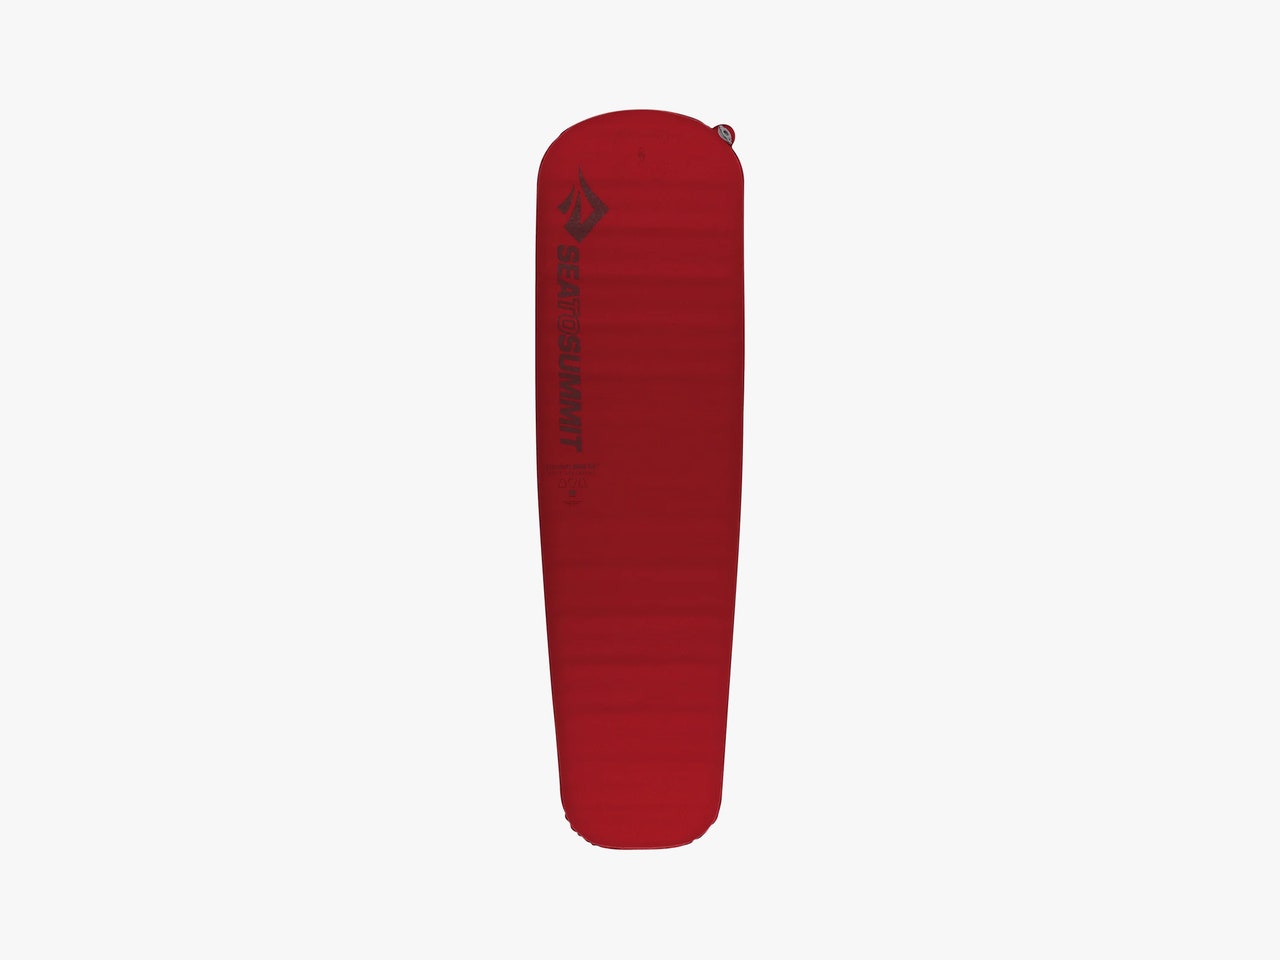 Red sleeping bag fully closed